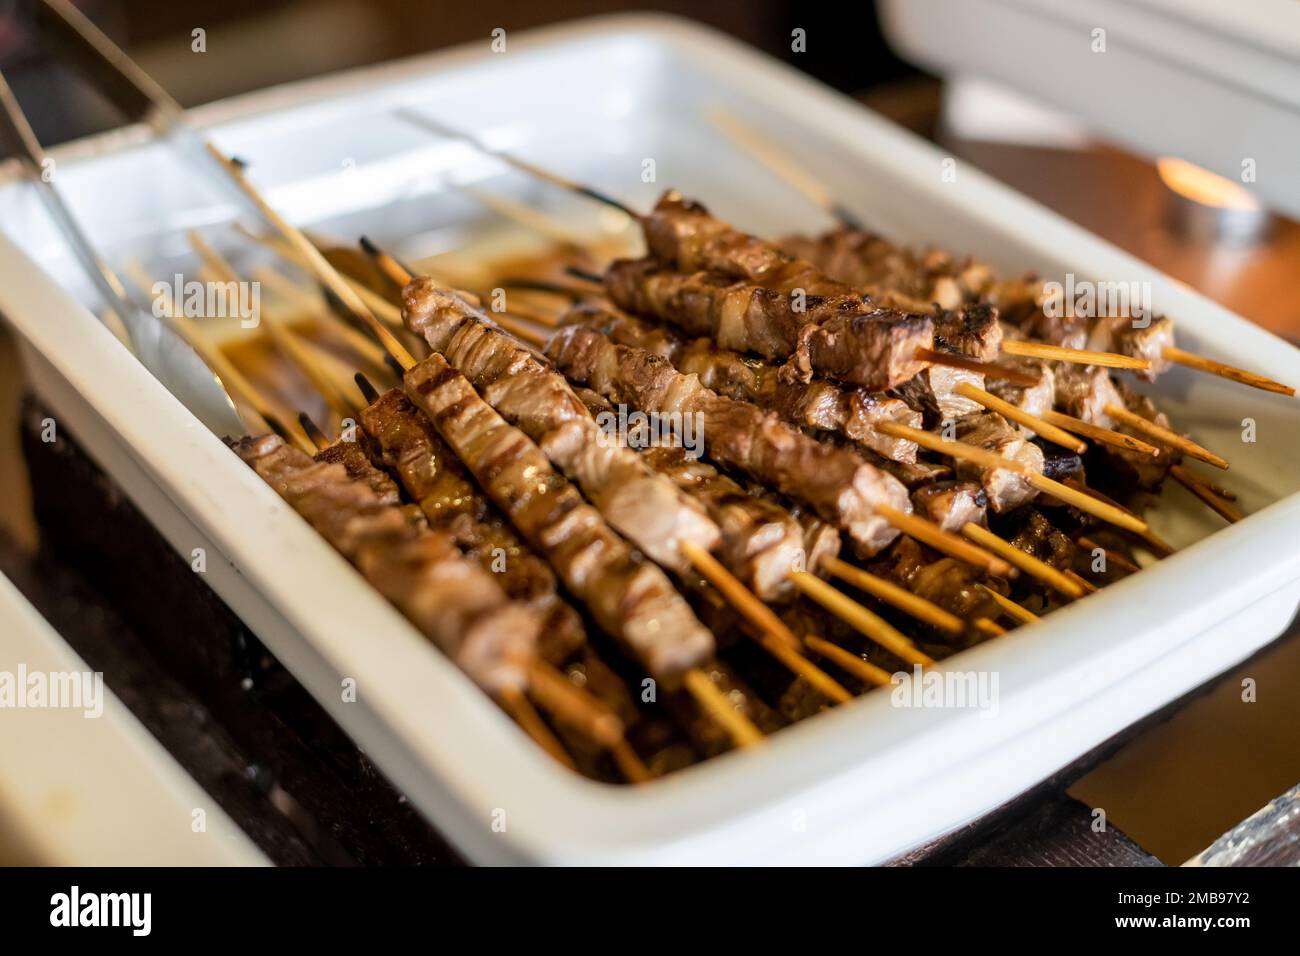 High angle of appetizing grilled pieces of lamb on skewers placed on white container Stock Photo